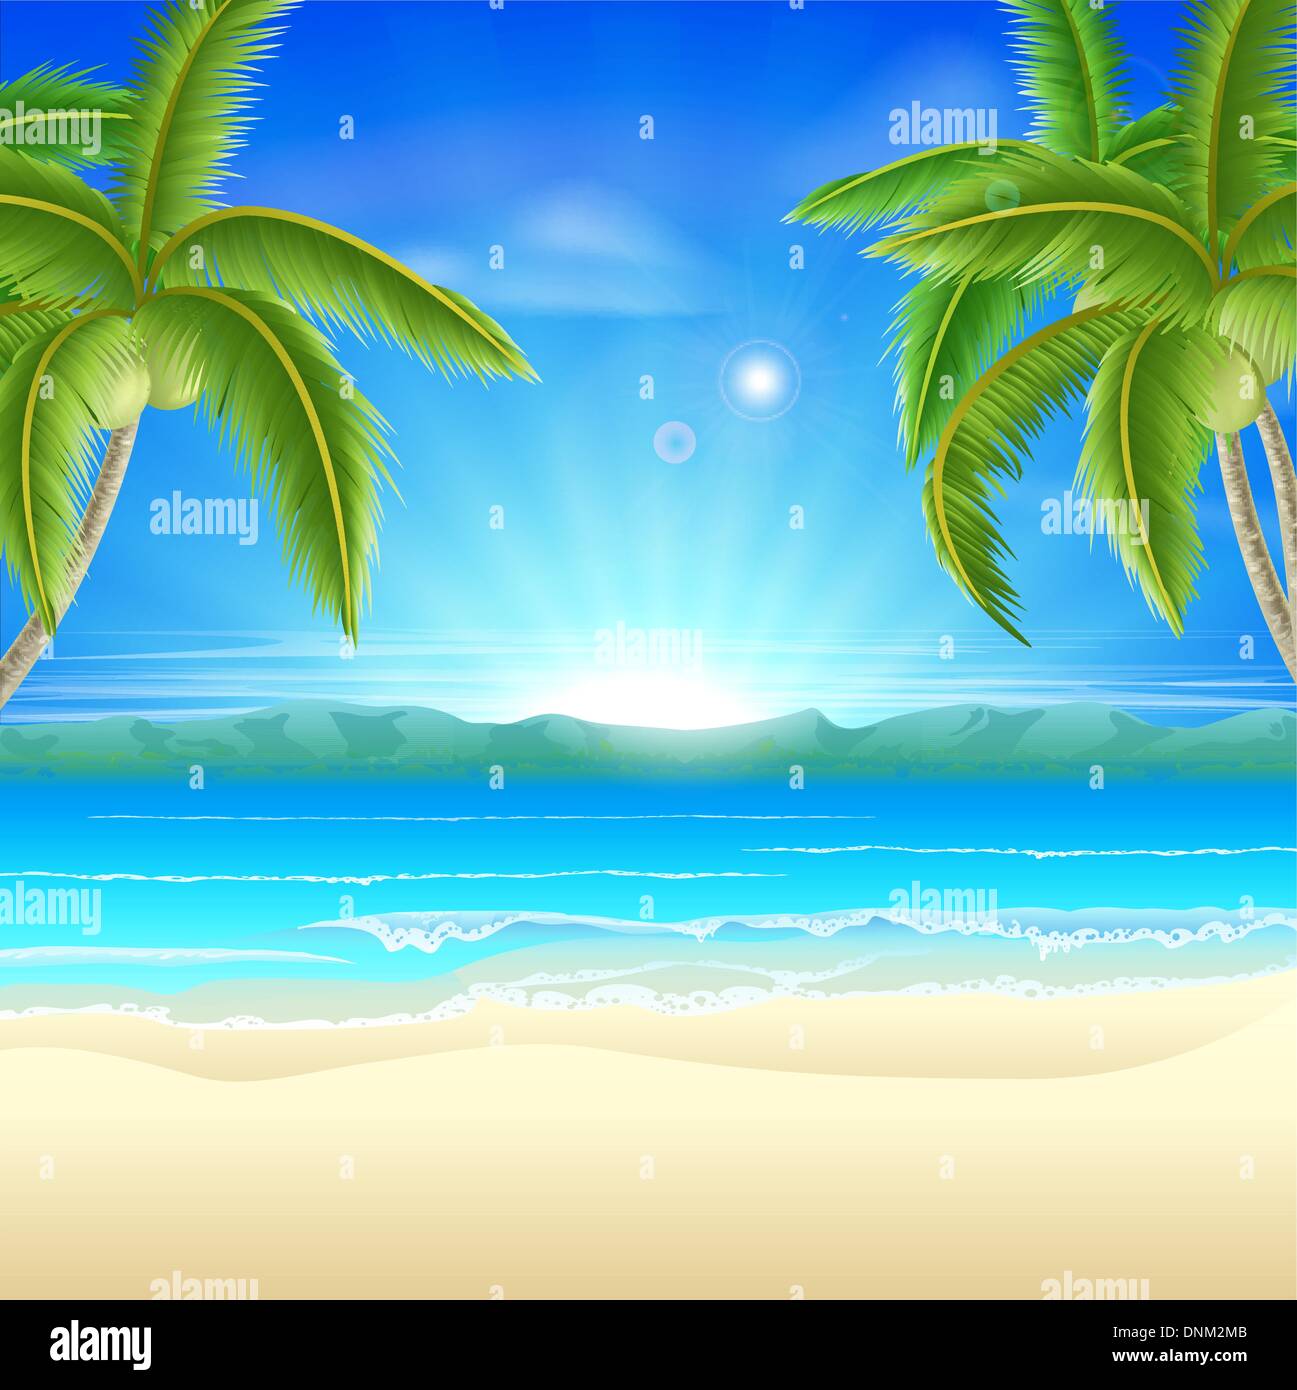 Summer holiday beach background of a beautiful summer sandy beach with coconut palm trees framing the image Stock Vector